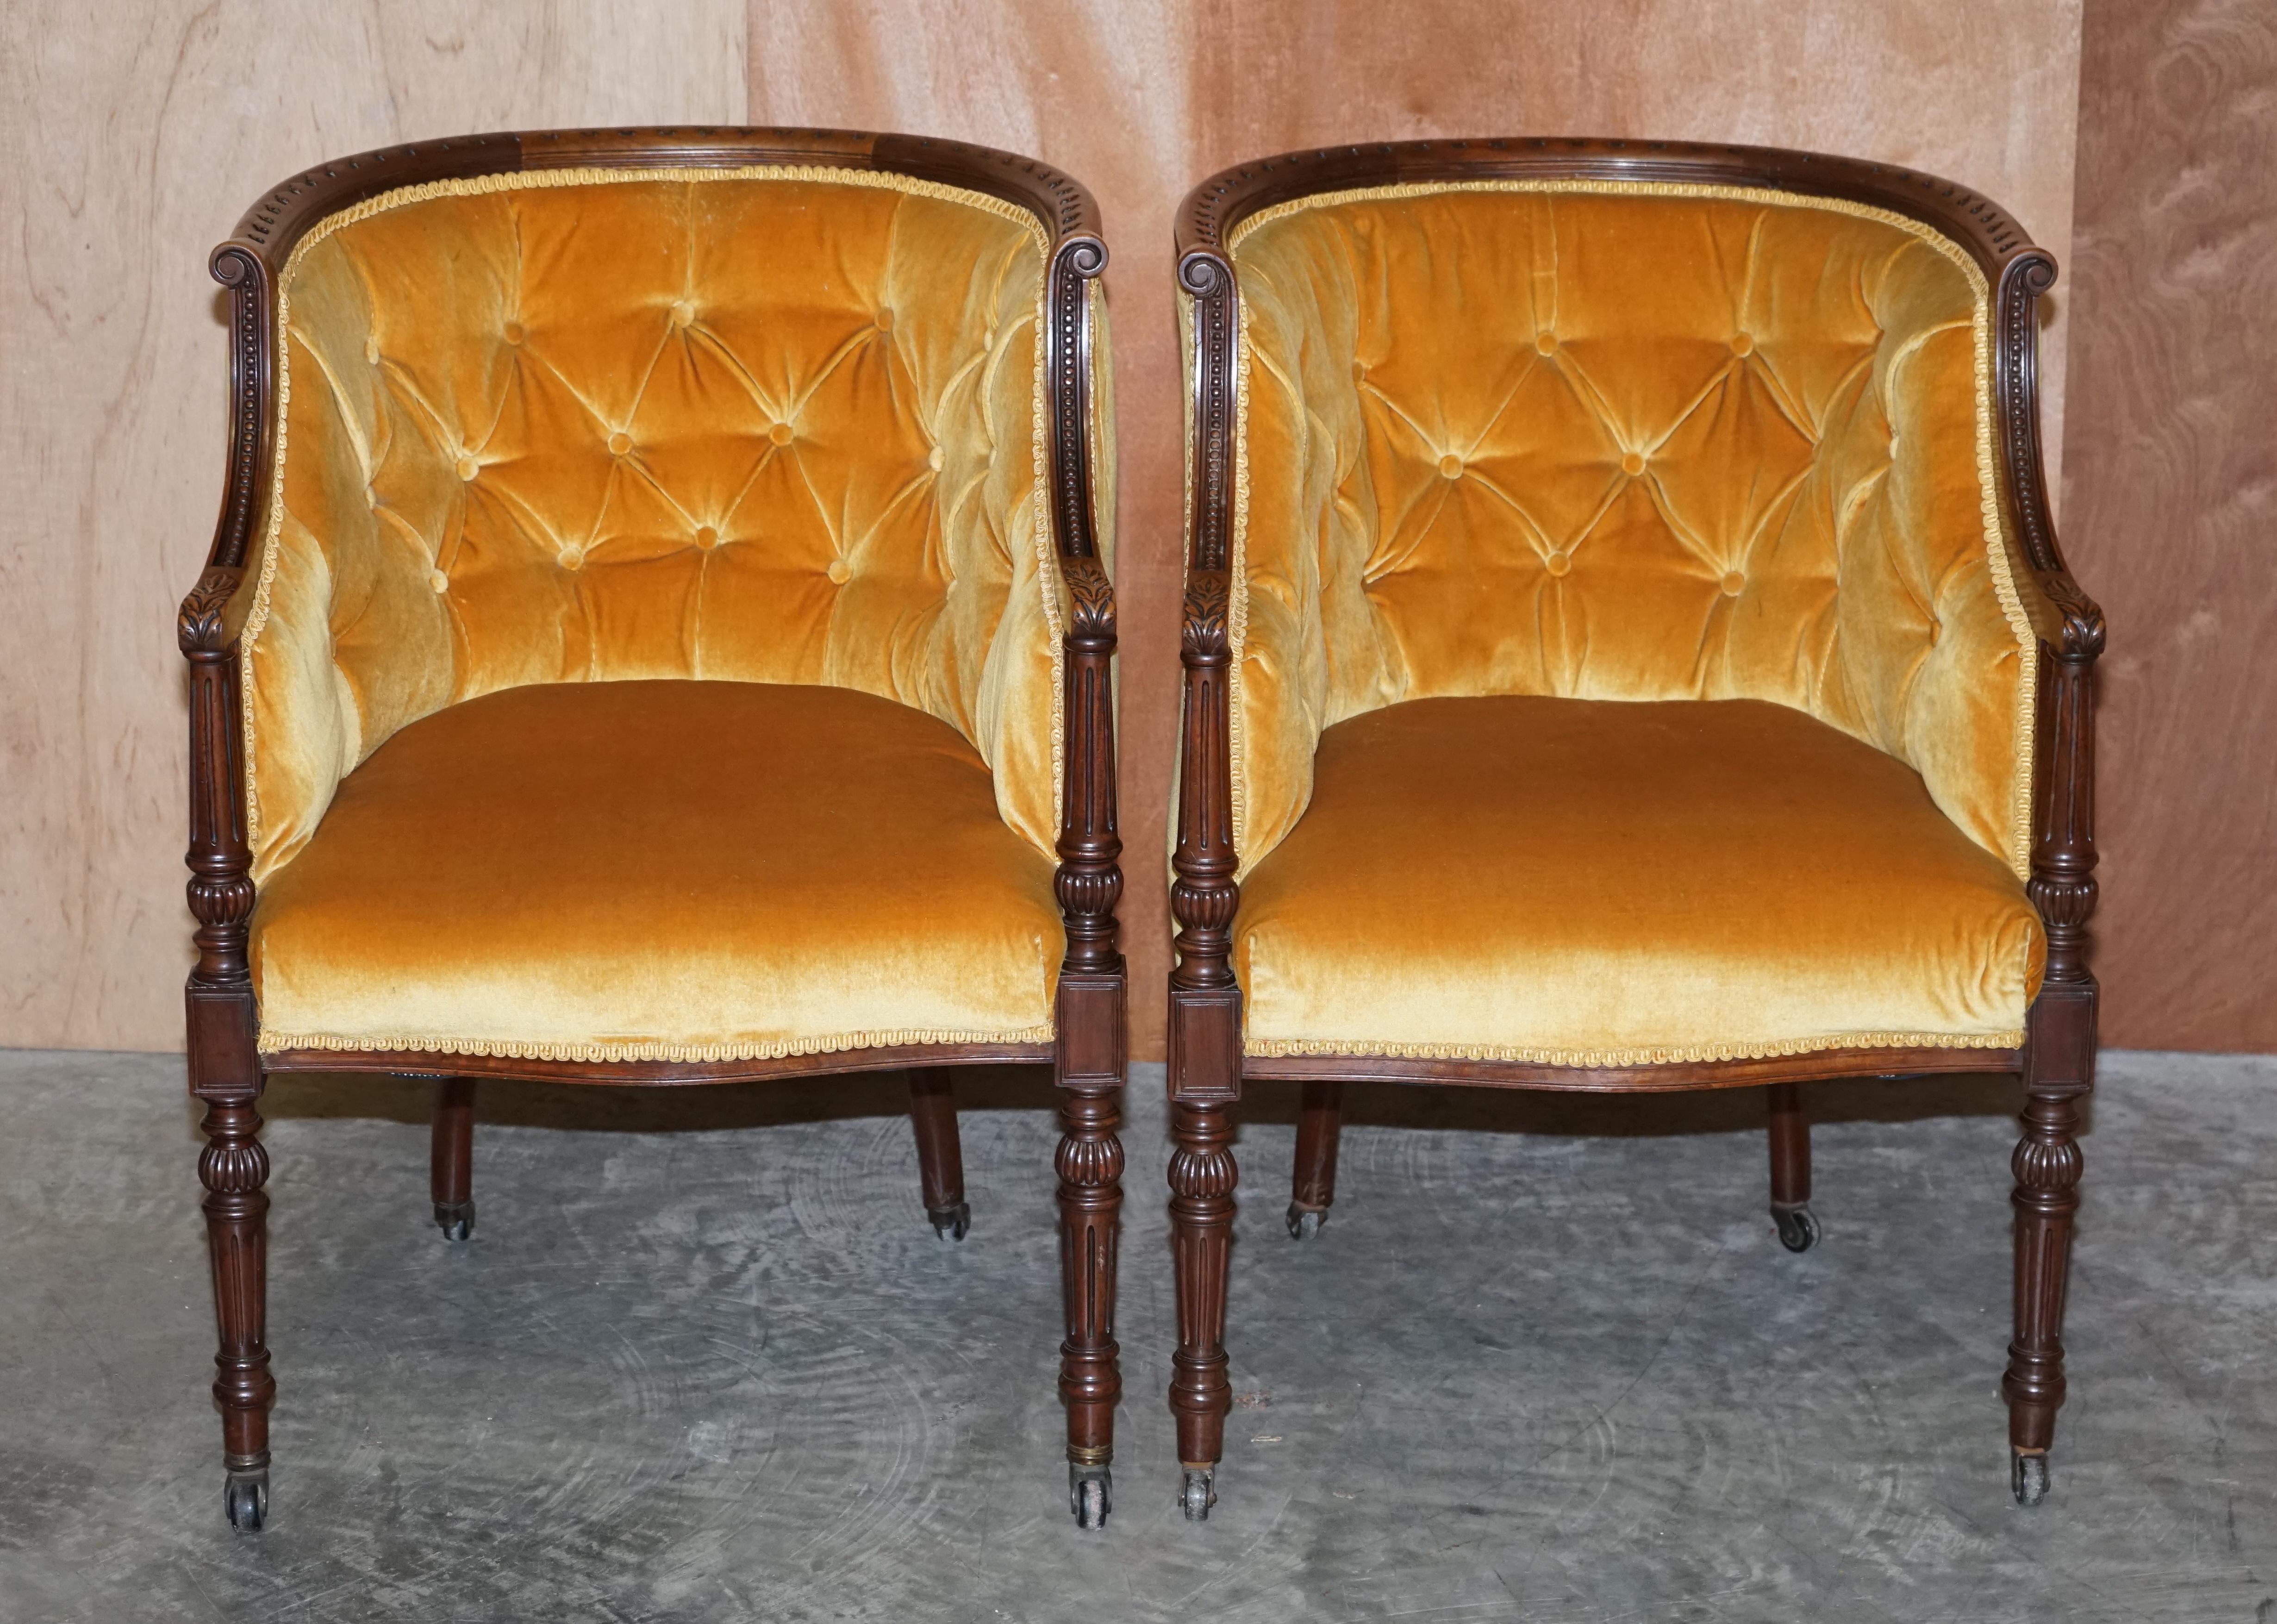 We are delighted to offer for sale this lovely pair of original late Regency tub armchairs with carved hardwood frames and velour tufted upholstery

A very good looking and well made pair, these are parlour or gentleman’s club tub chairs, ideal